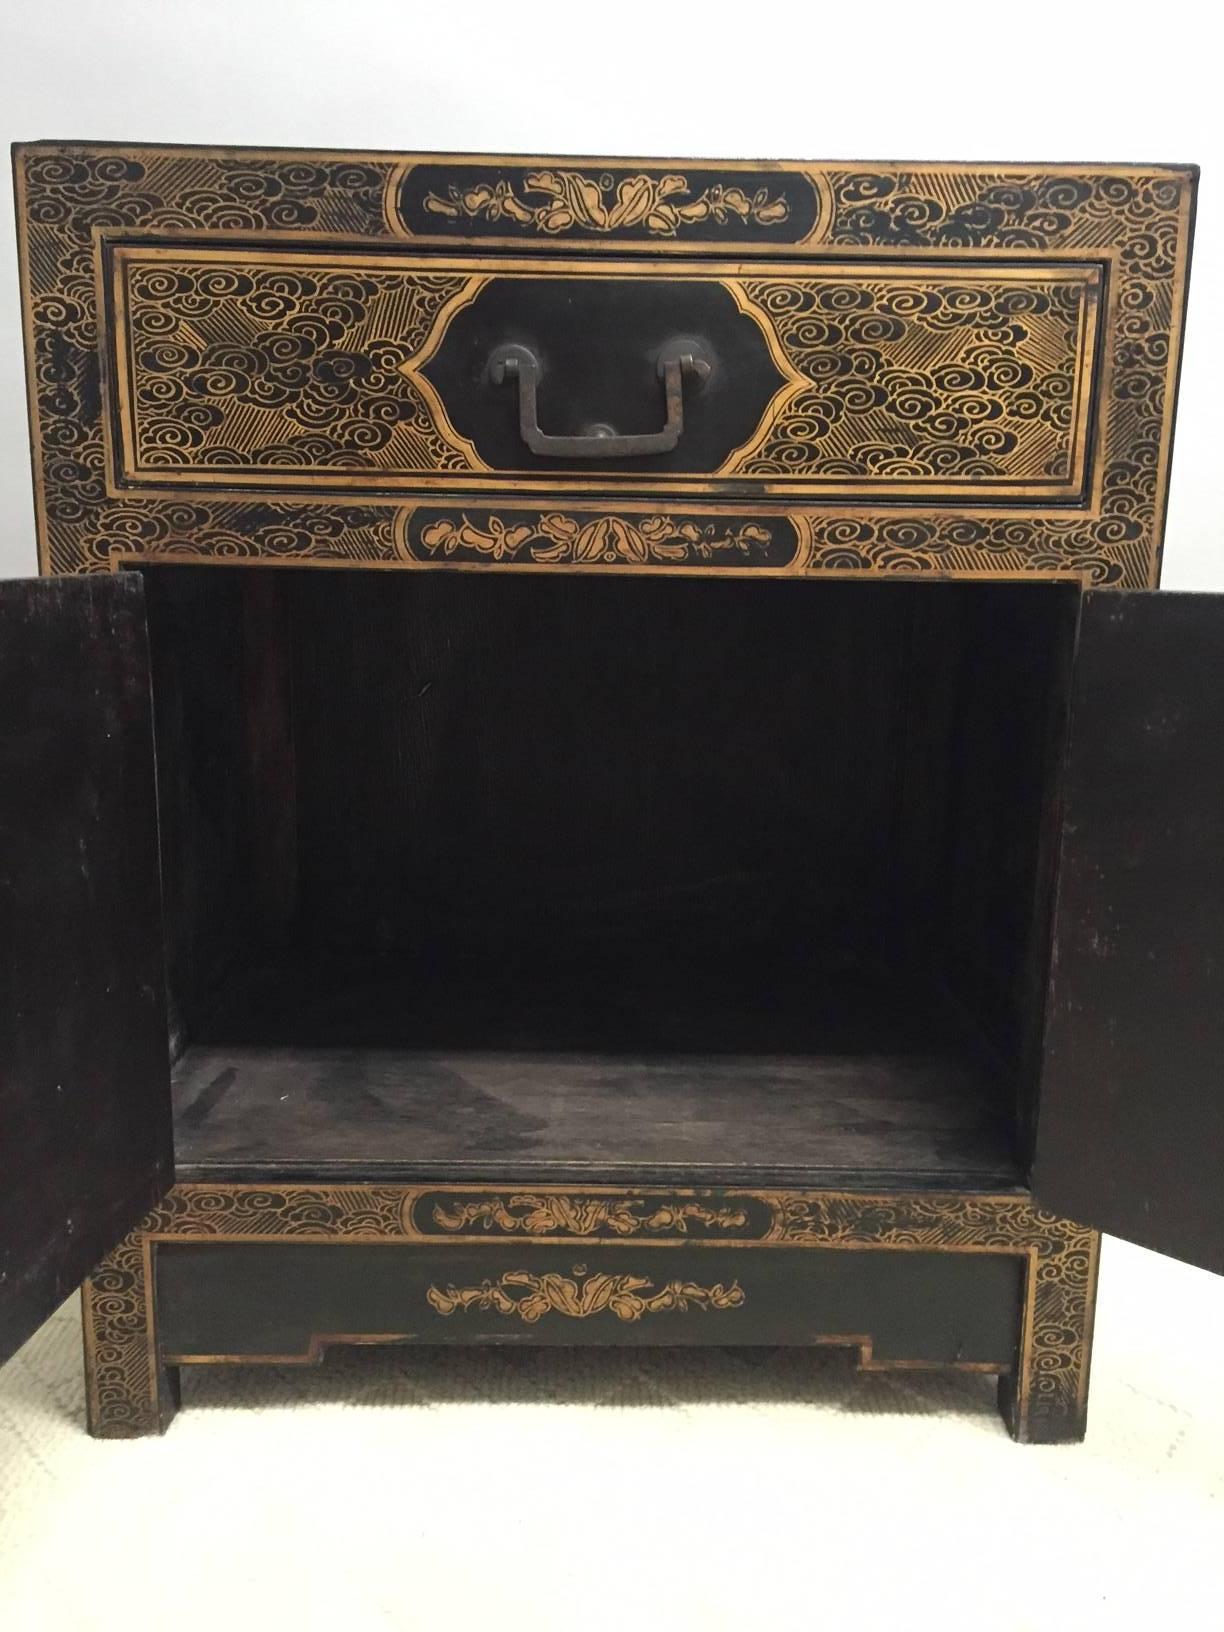 Two elegant black laquer hand-painted Chinese chests having gold detailed figures in a Classic chinoiserie landscape that are unique on each chest and compliment one another. There's a single drawer on top with two doors underneath that open to